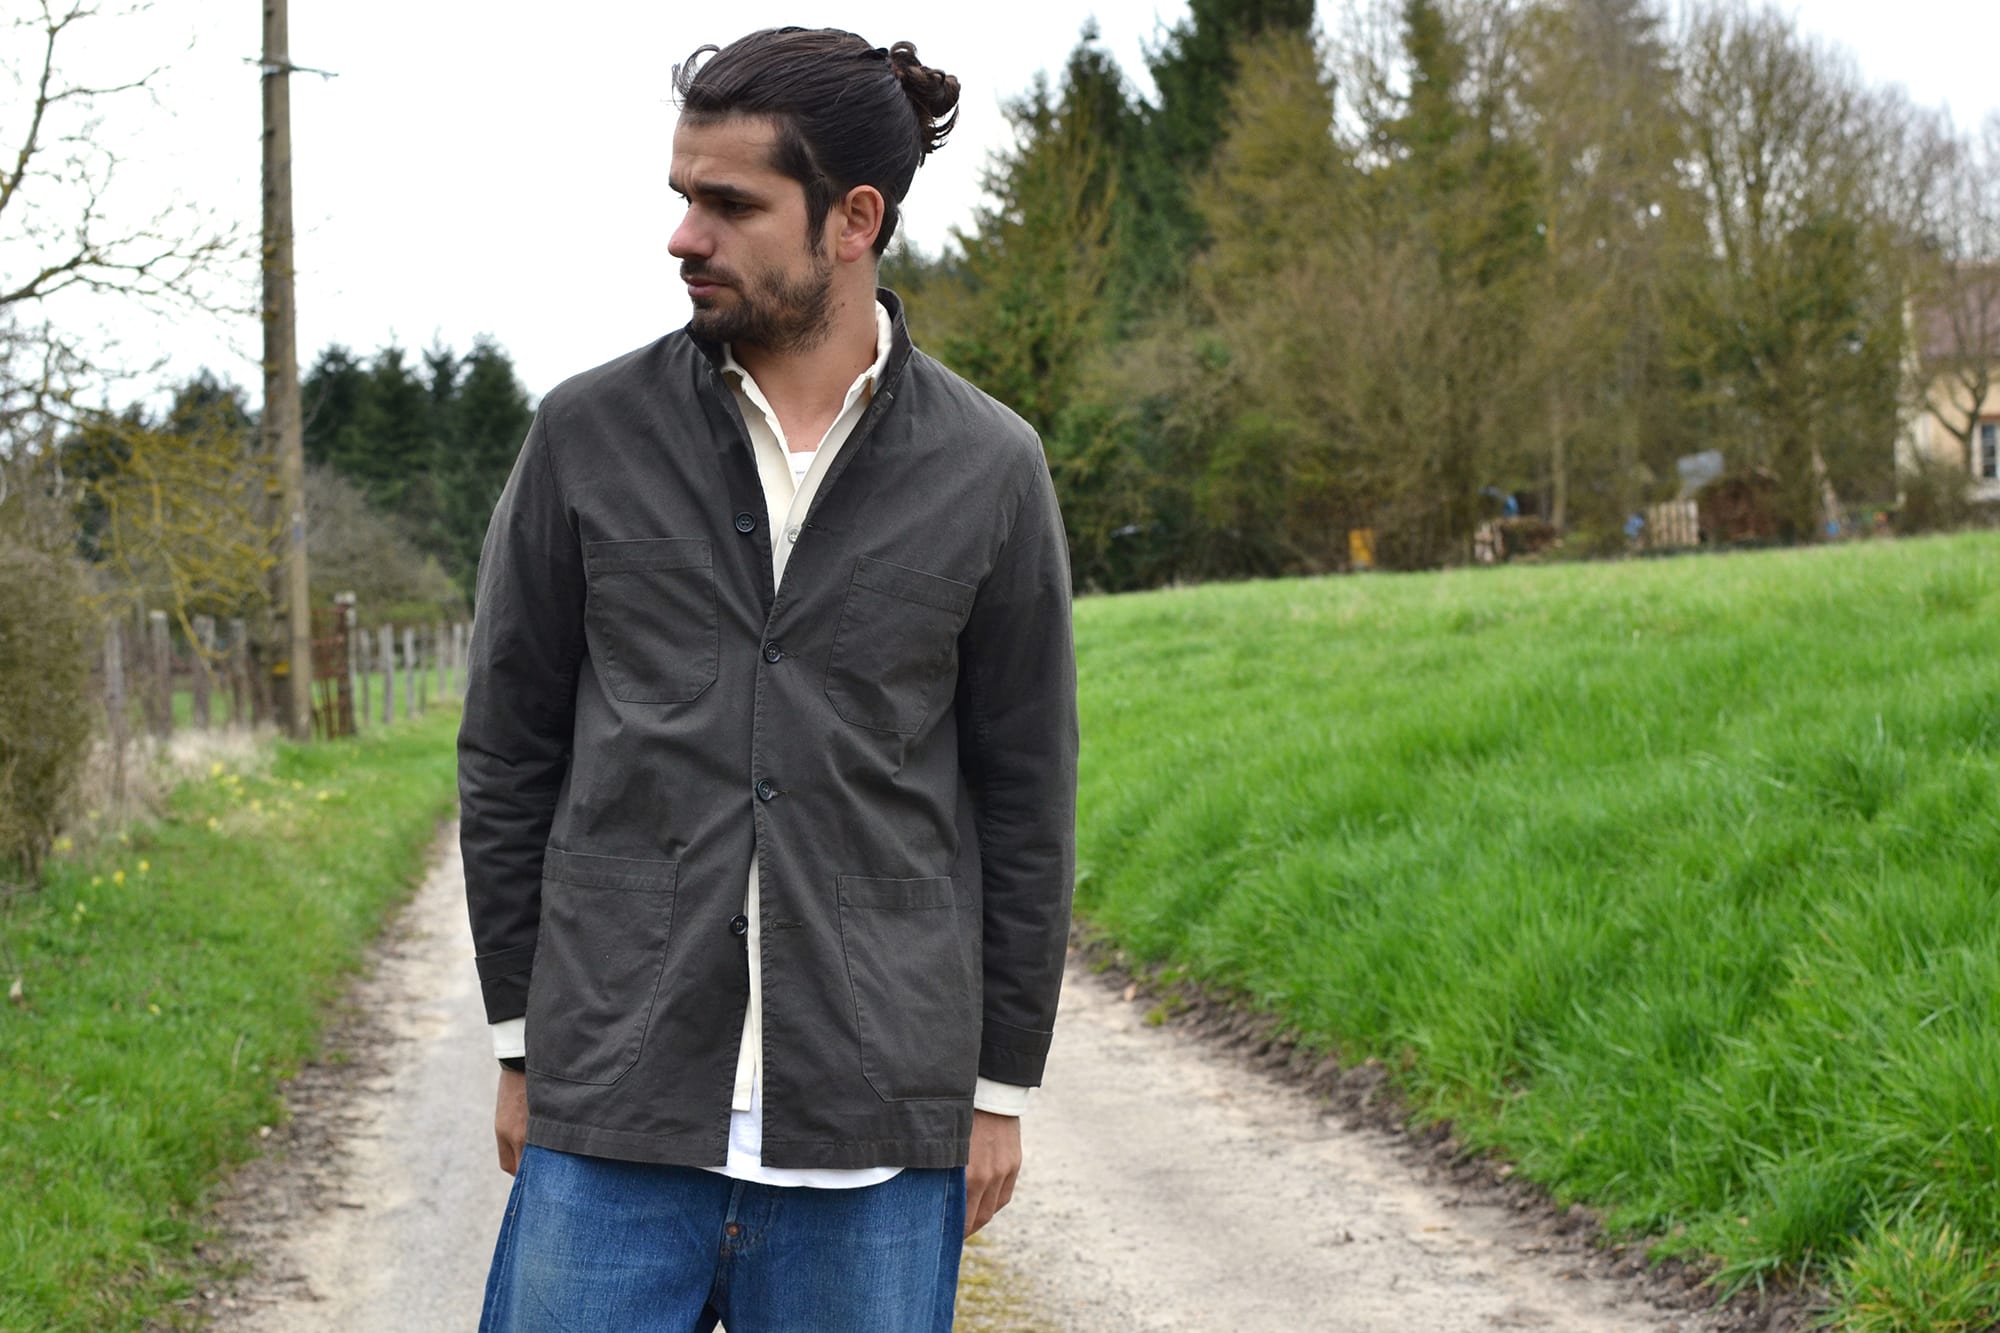 WOrkwear style with vetra work jacket, dockers x patrik ervell overshirt and Levi's Big E915 501 and converse CT70 